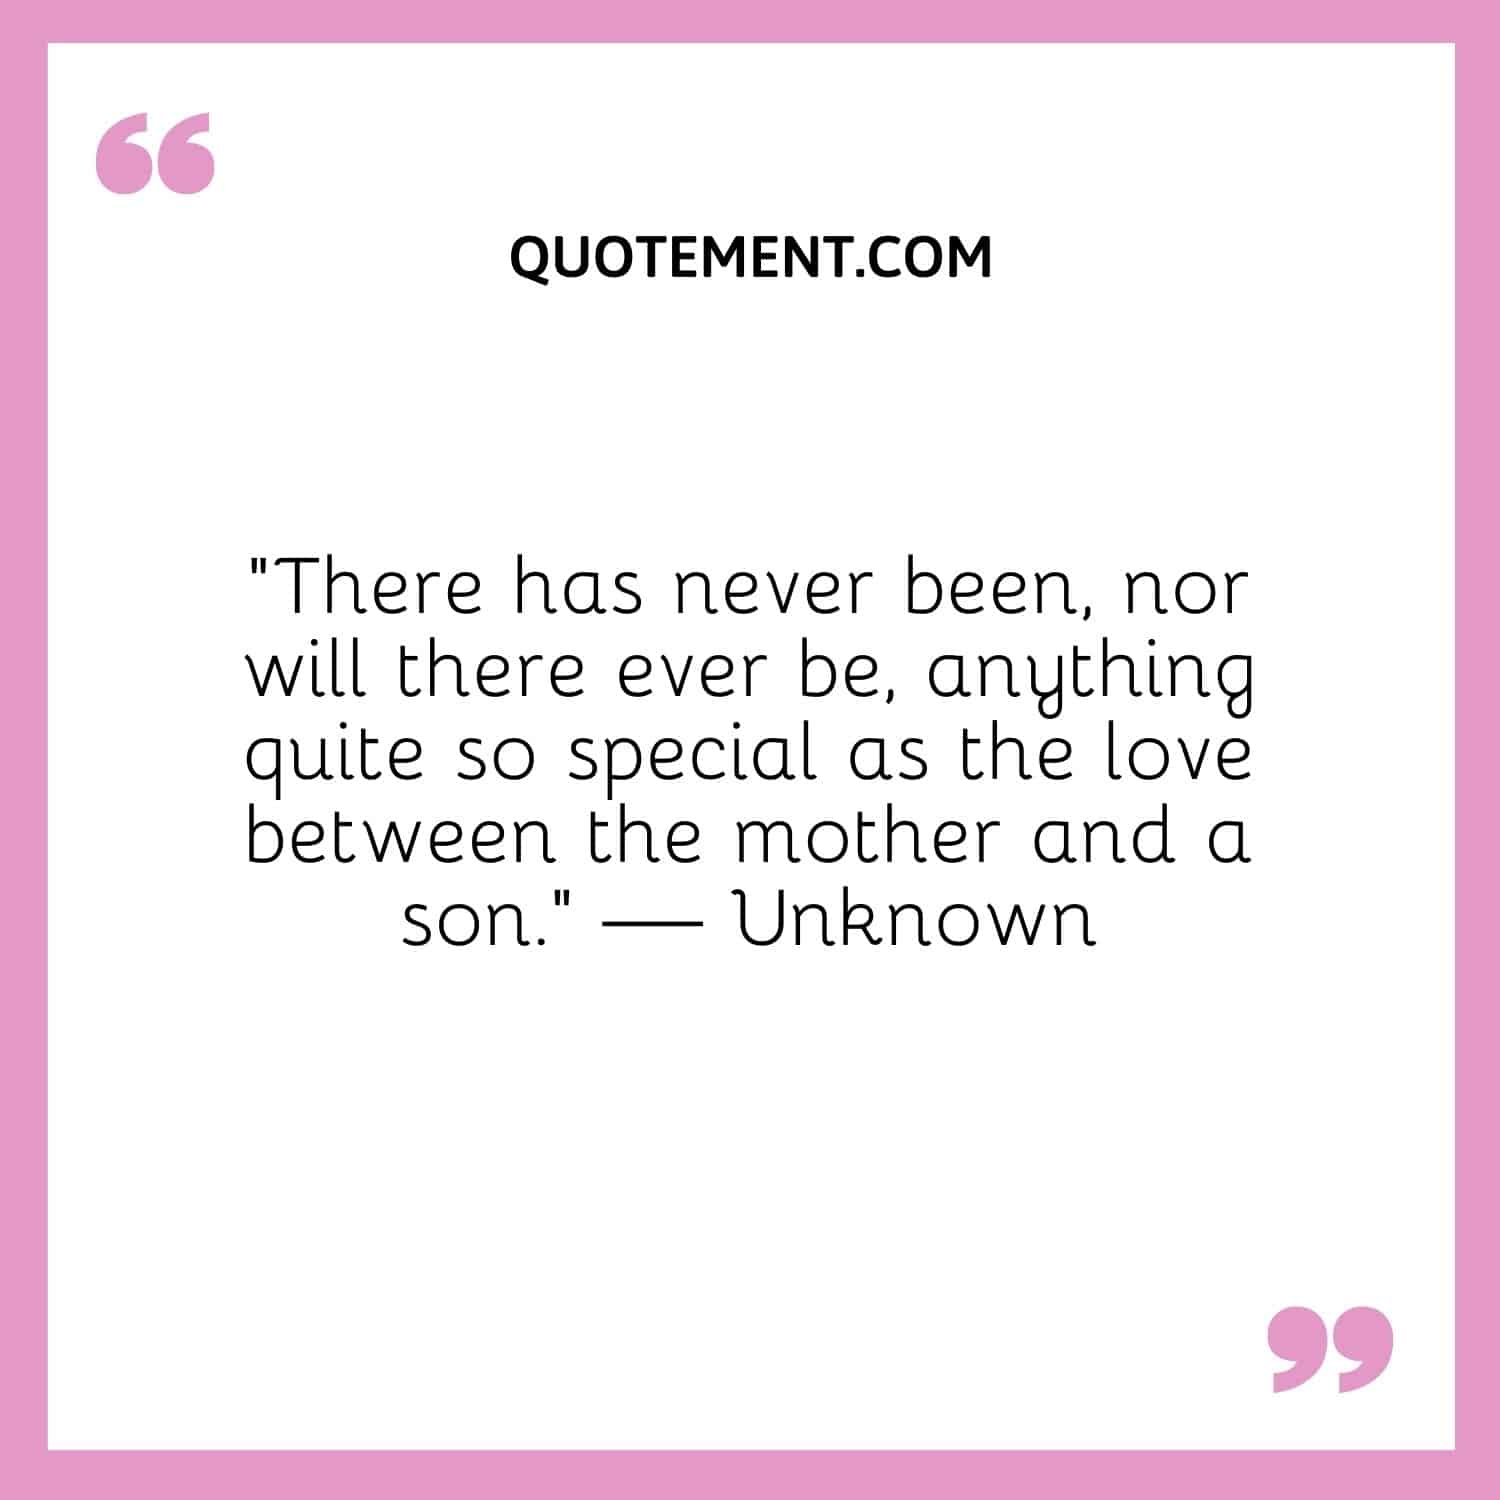 There has never been, nor will there ever be, anything quite so special as the love between the mother and a son.